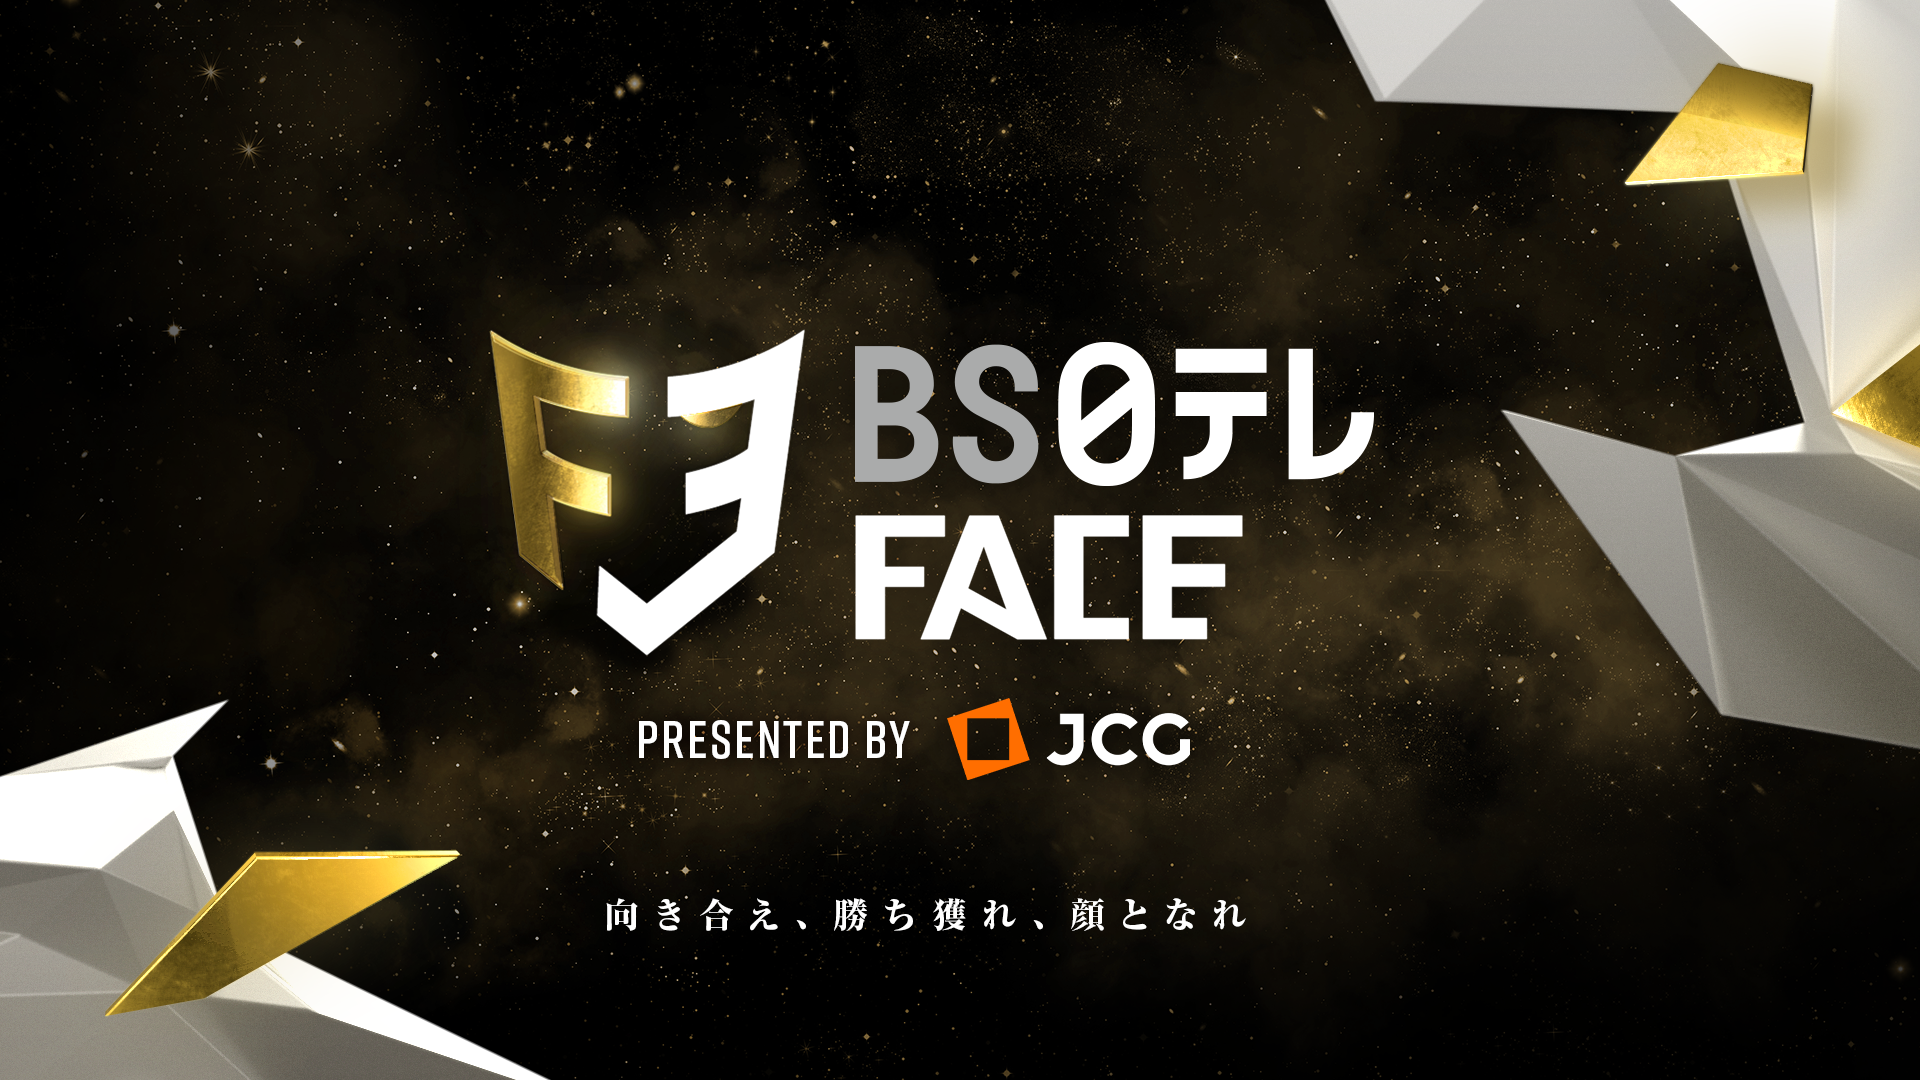 ＢＳ日テレFACE Apex Legends presented by JCG 【2/9,2/10,2/22開催】